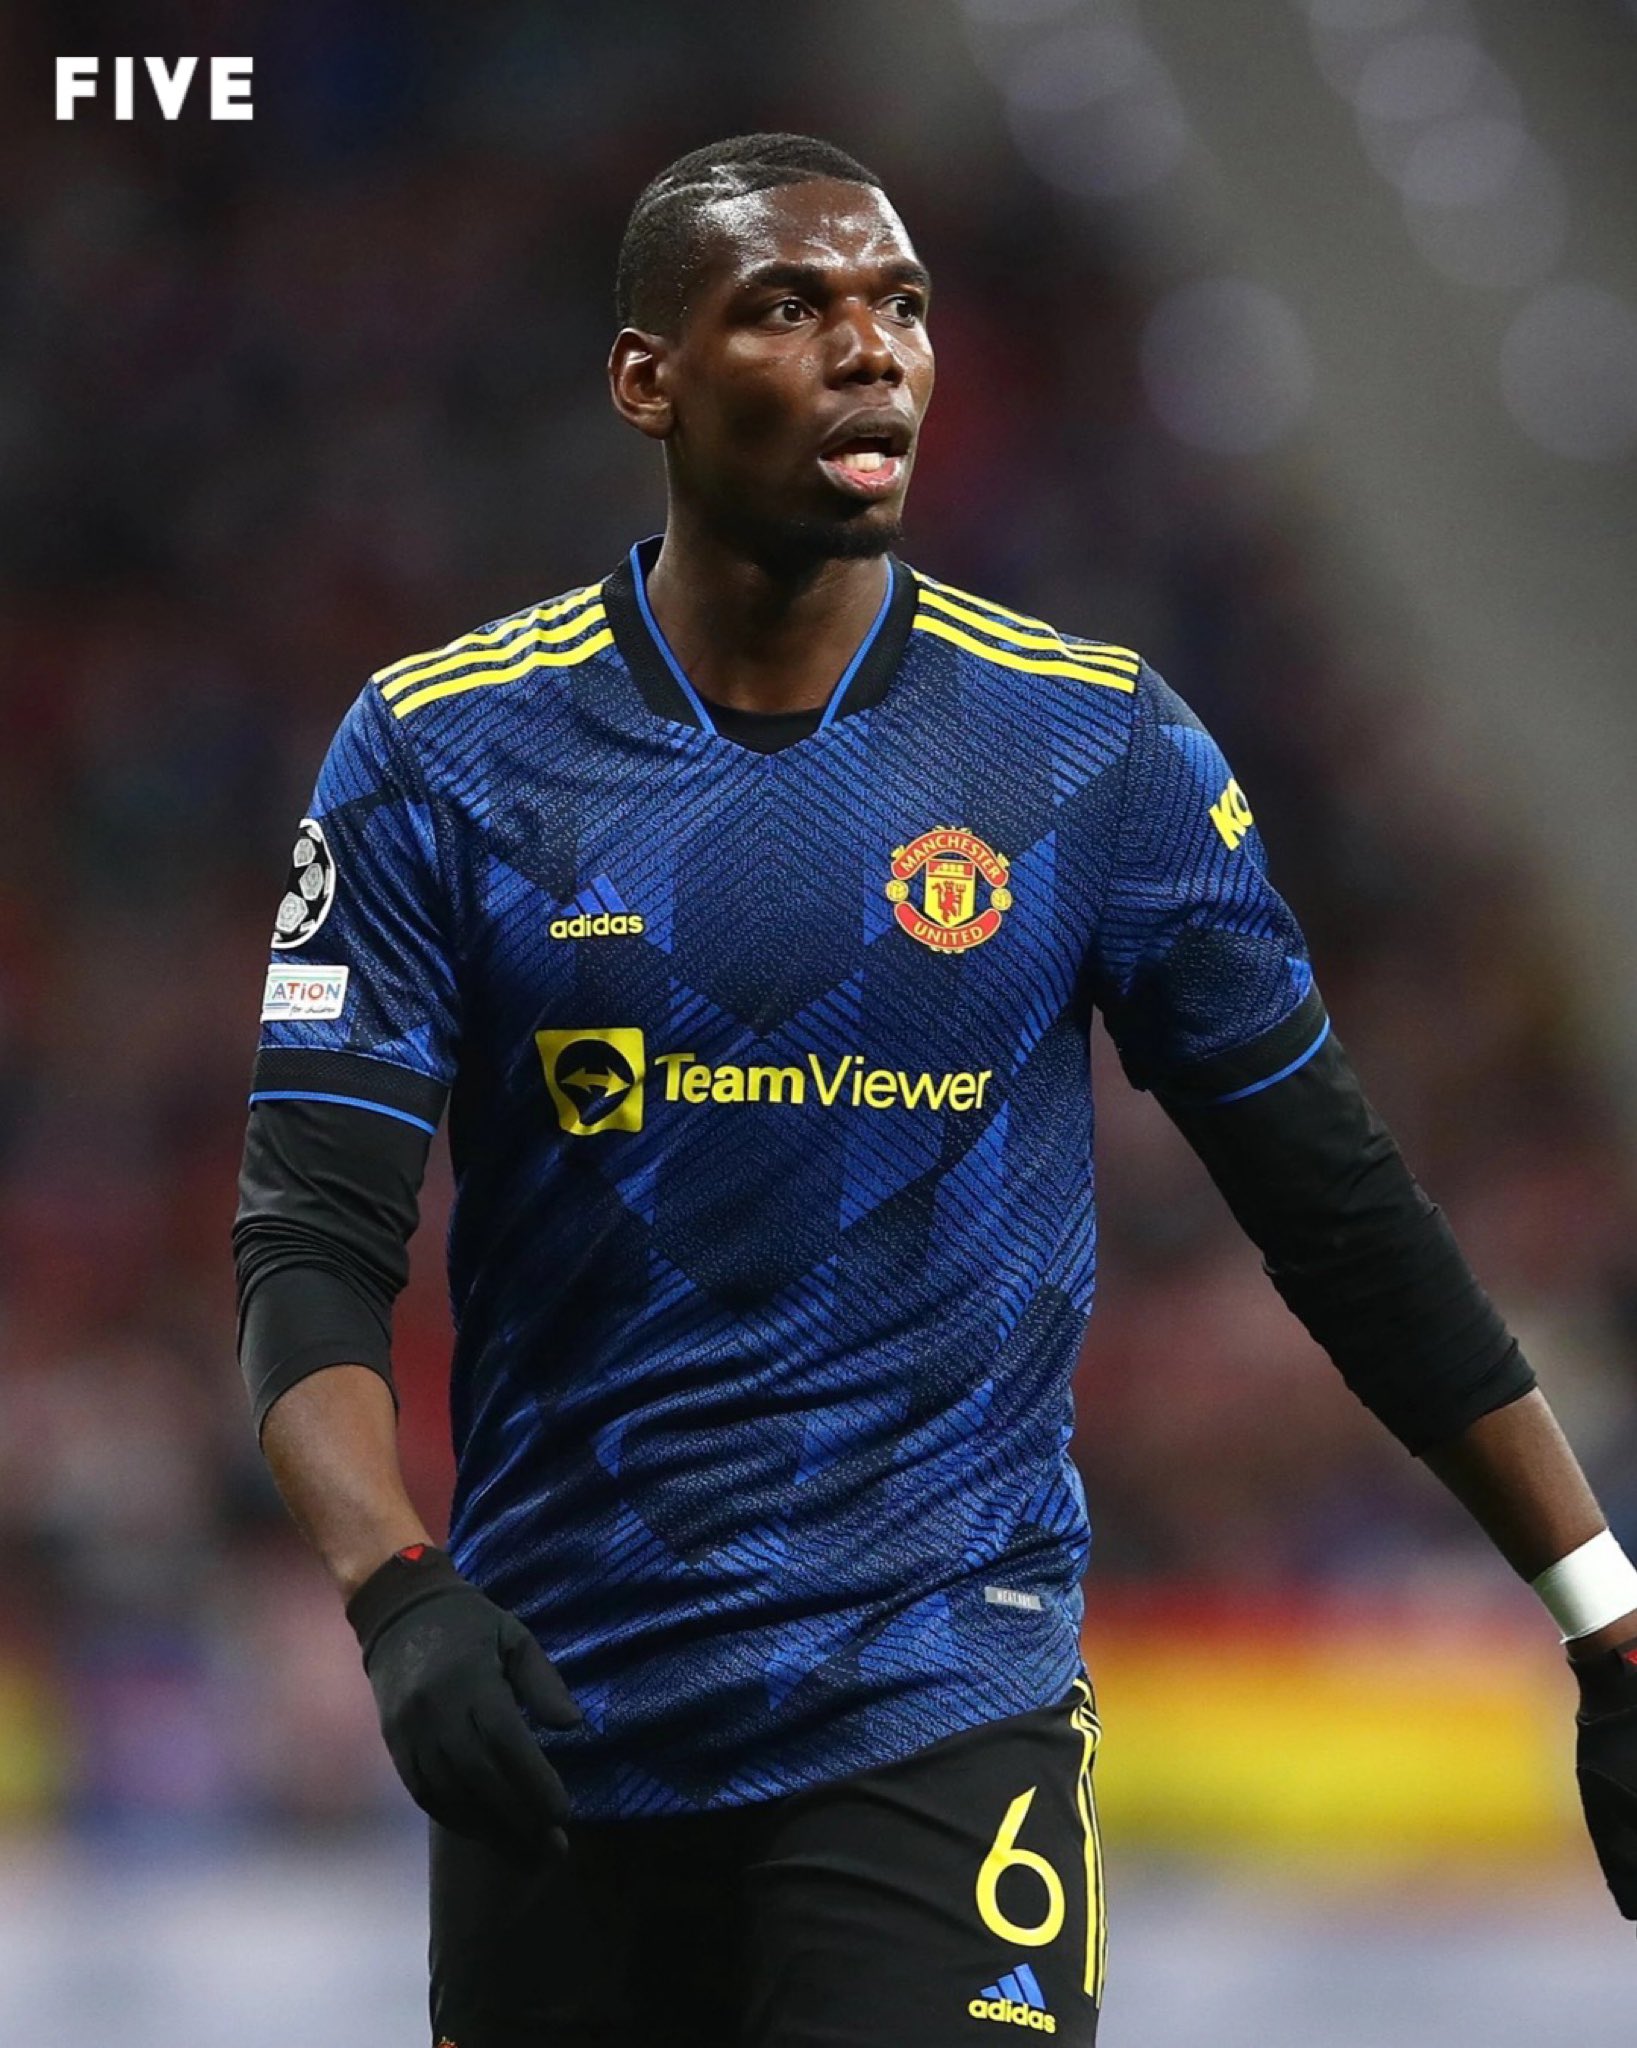   Happy Birthday to Manchester United midfielder, Paul Pogba!    Have a great day  